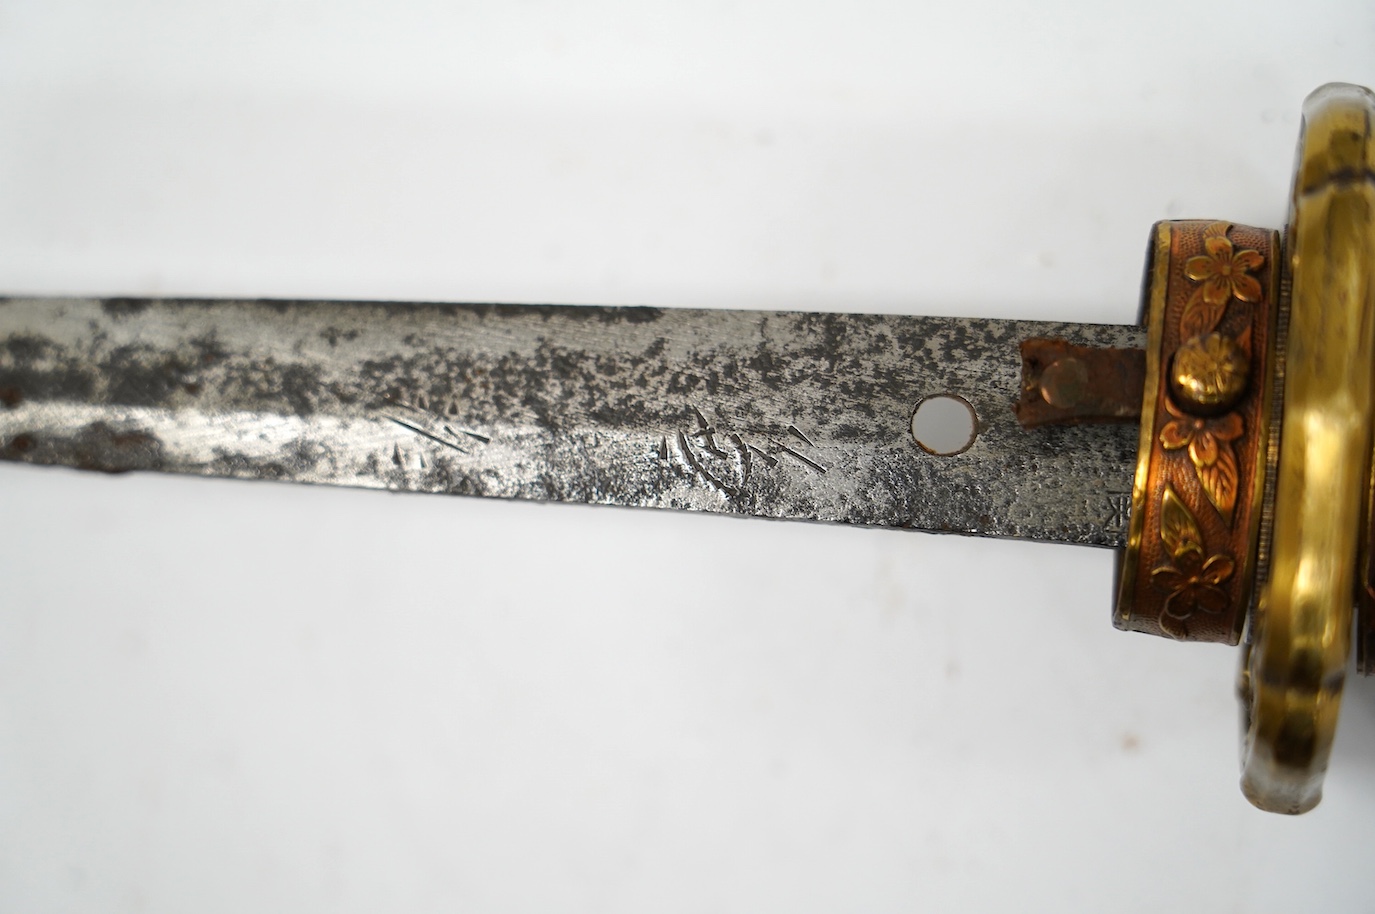 A Japanese WWII army officer’s sword Katana, blade 57.9cm, signed and dated with Seki Arsenal stamp, retaining good polish, in shin gunto mounts with leather combat cover on hilt and scabbard, the latter with plate stamp